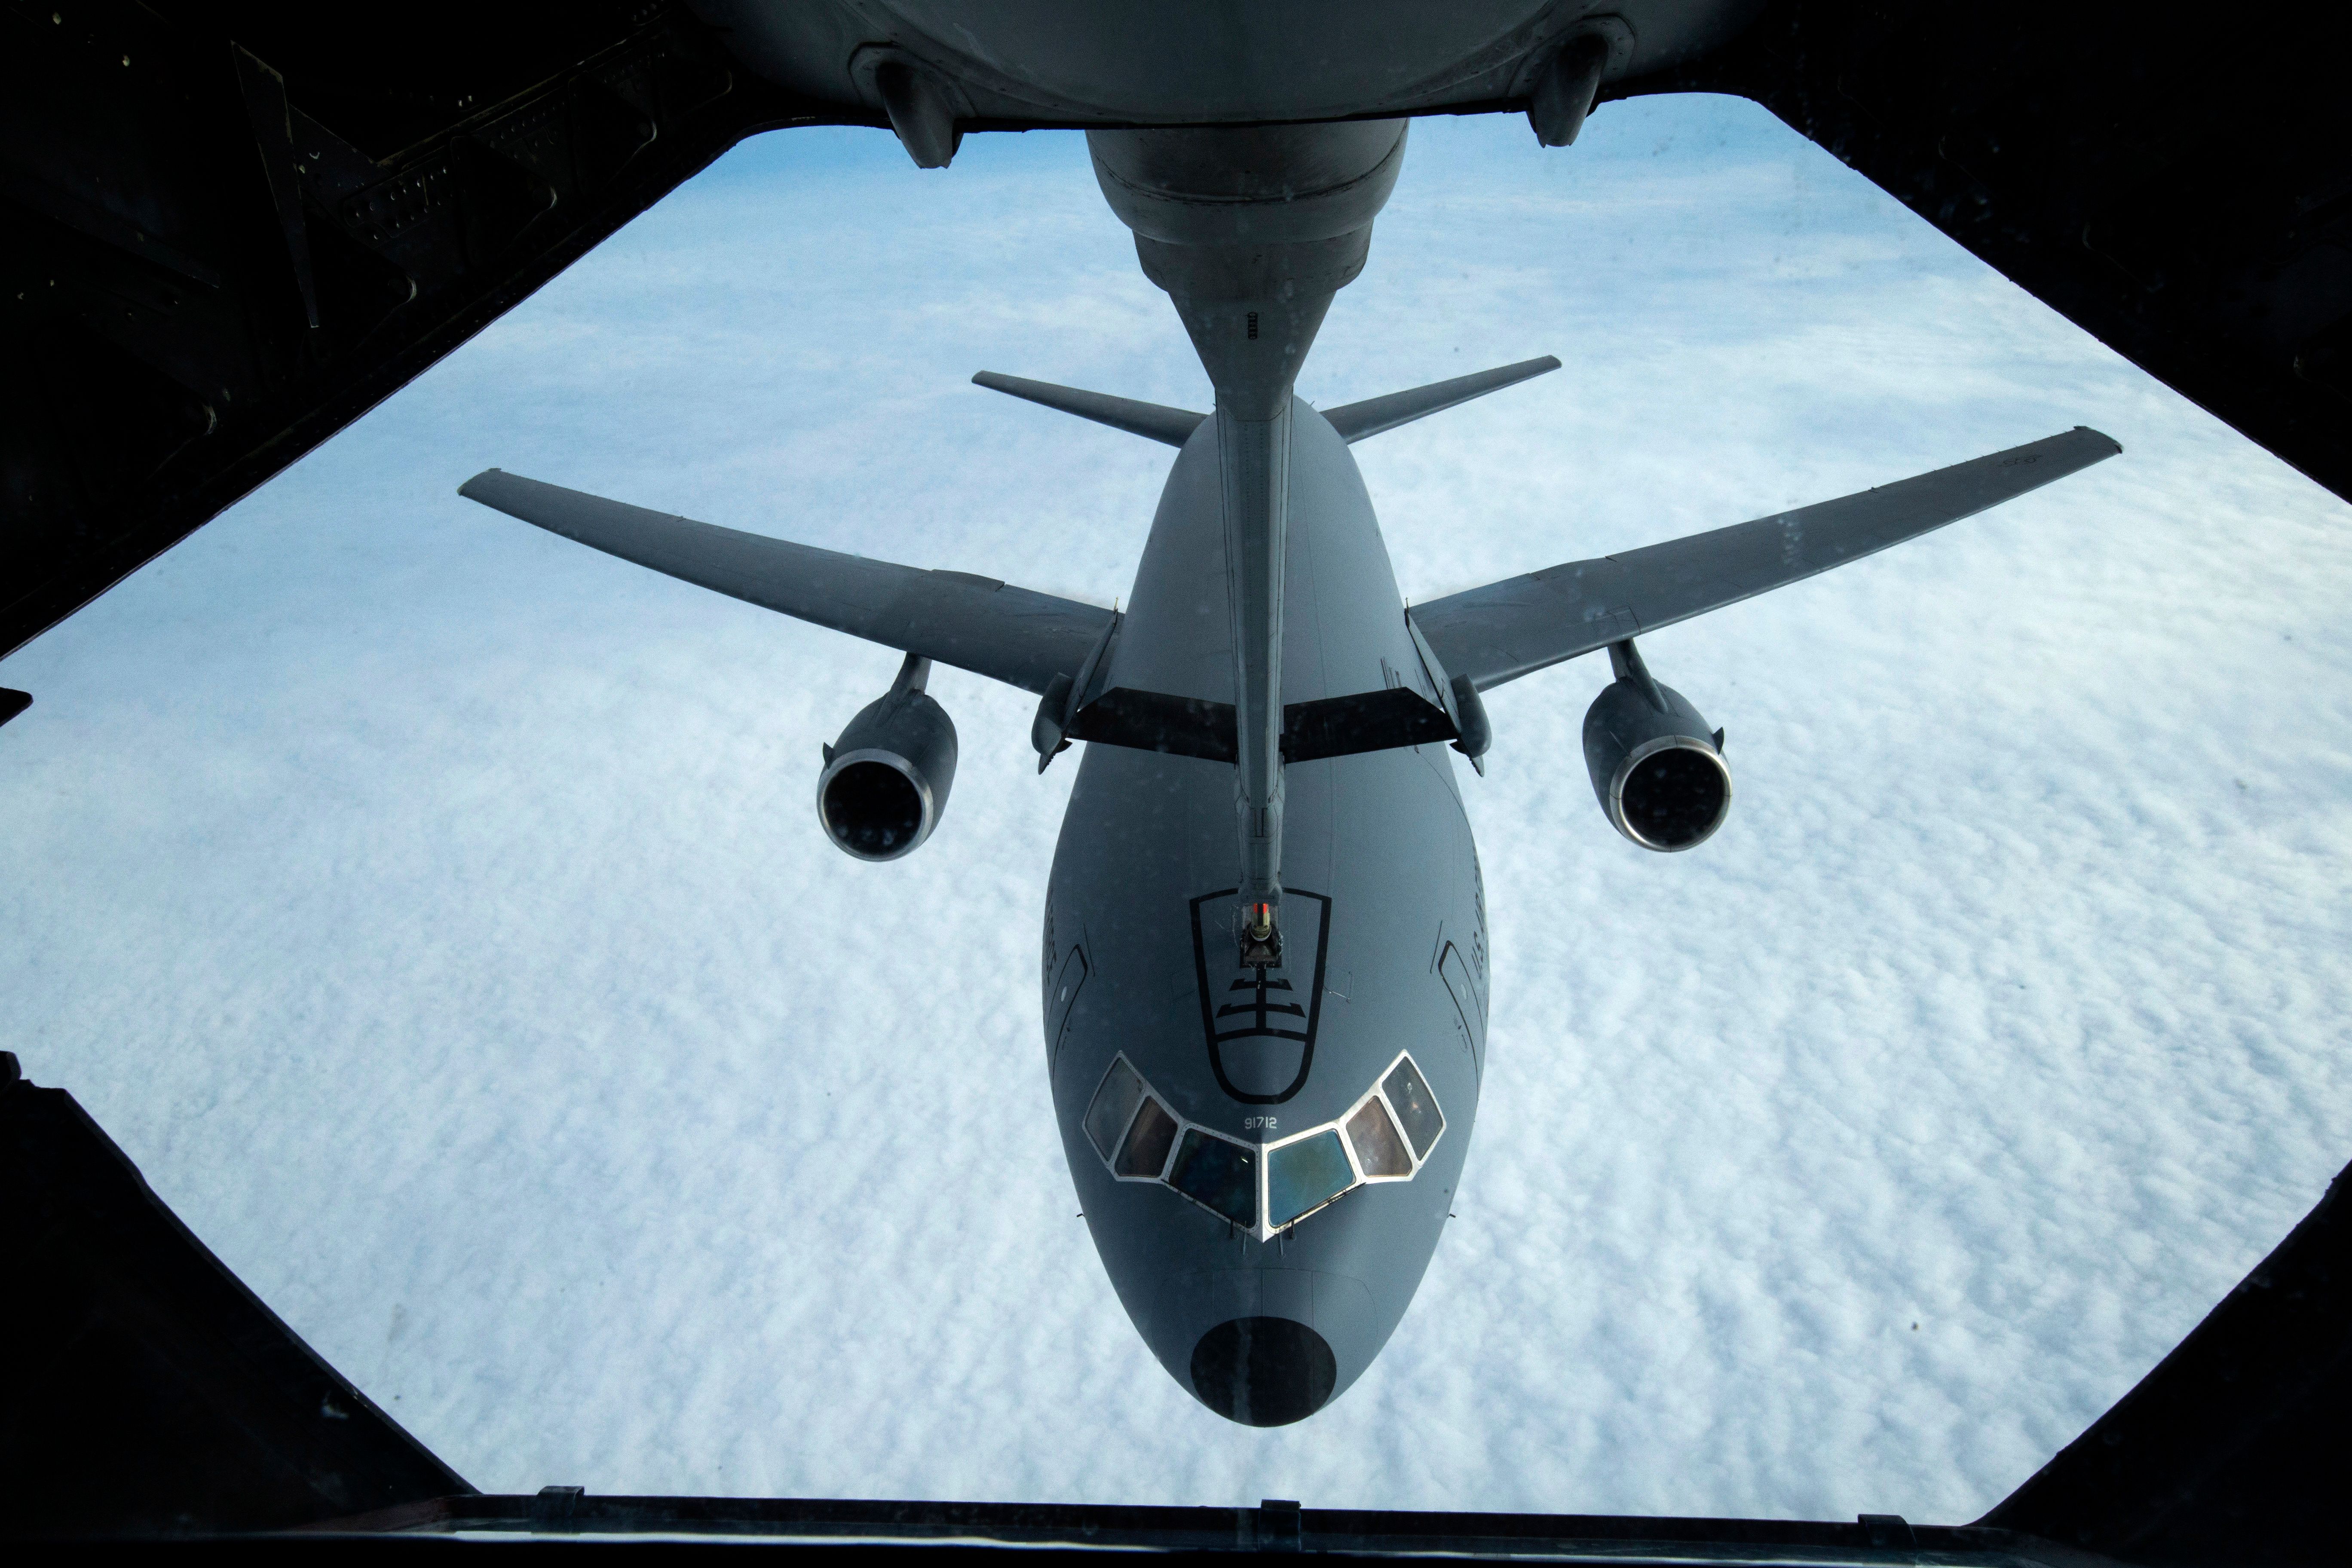 A KC-10 Extender refueling another aircraft above the clouds.